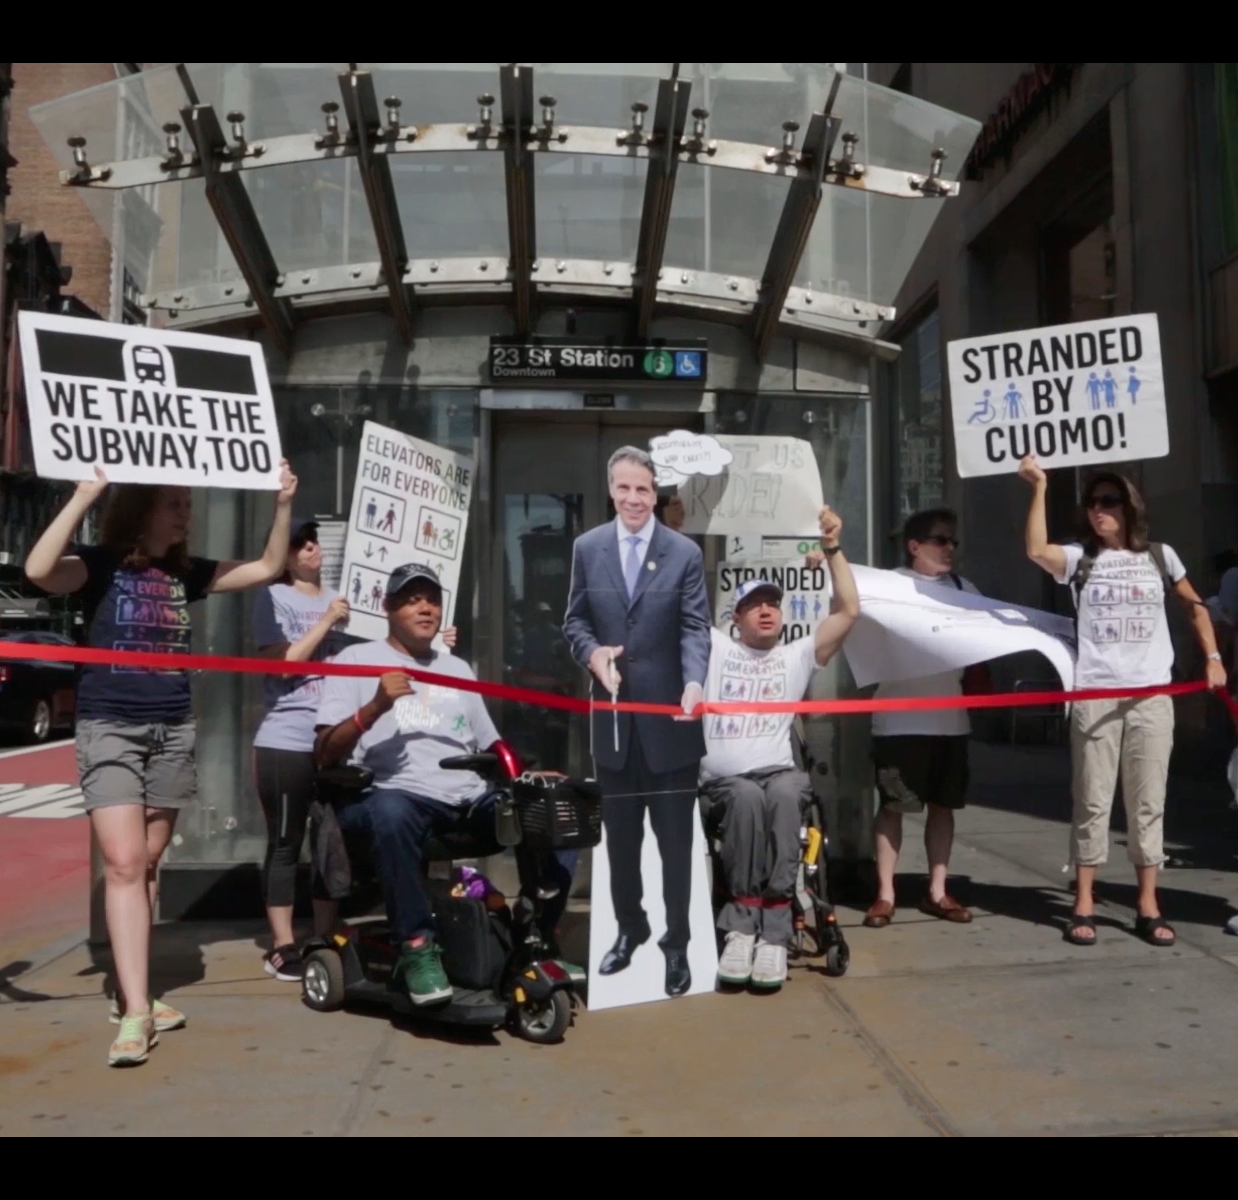 activists carry posters that read "stranded by cuomo", "We take the subway too" and "elevators are for everyone" next to a cardboard cutout of governor Cuomo cutting a ribbon